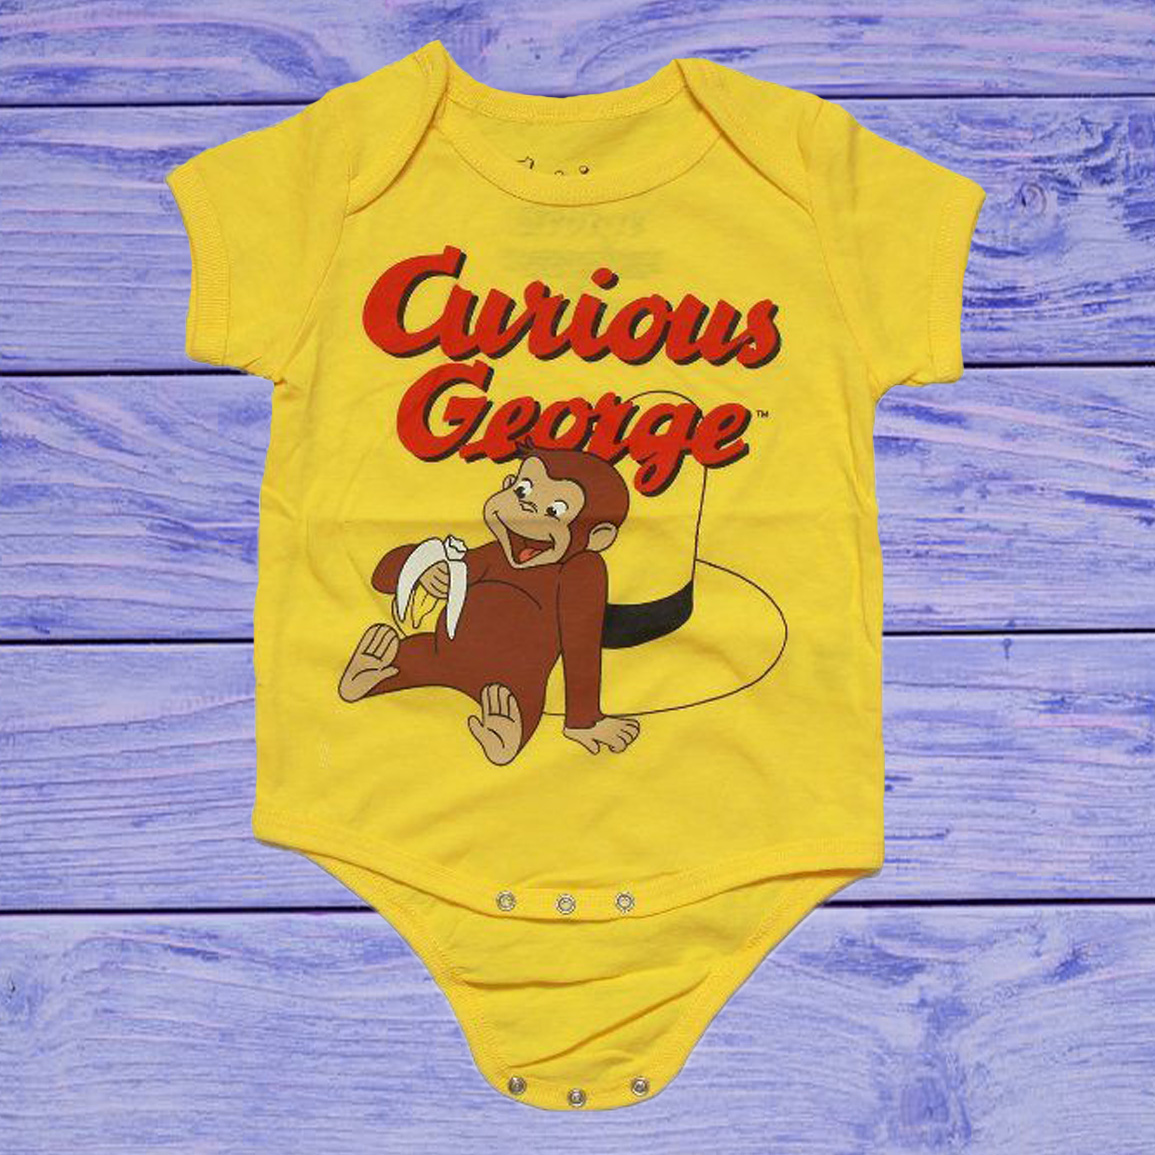 Curious George Baby Onesie - Custom Baby Onesie - Cute Curious George Baby Suit - New Born Gift Set - Baby Shower Gift - Gift for Baby - Funny Animal